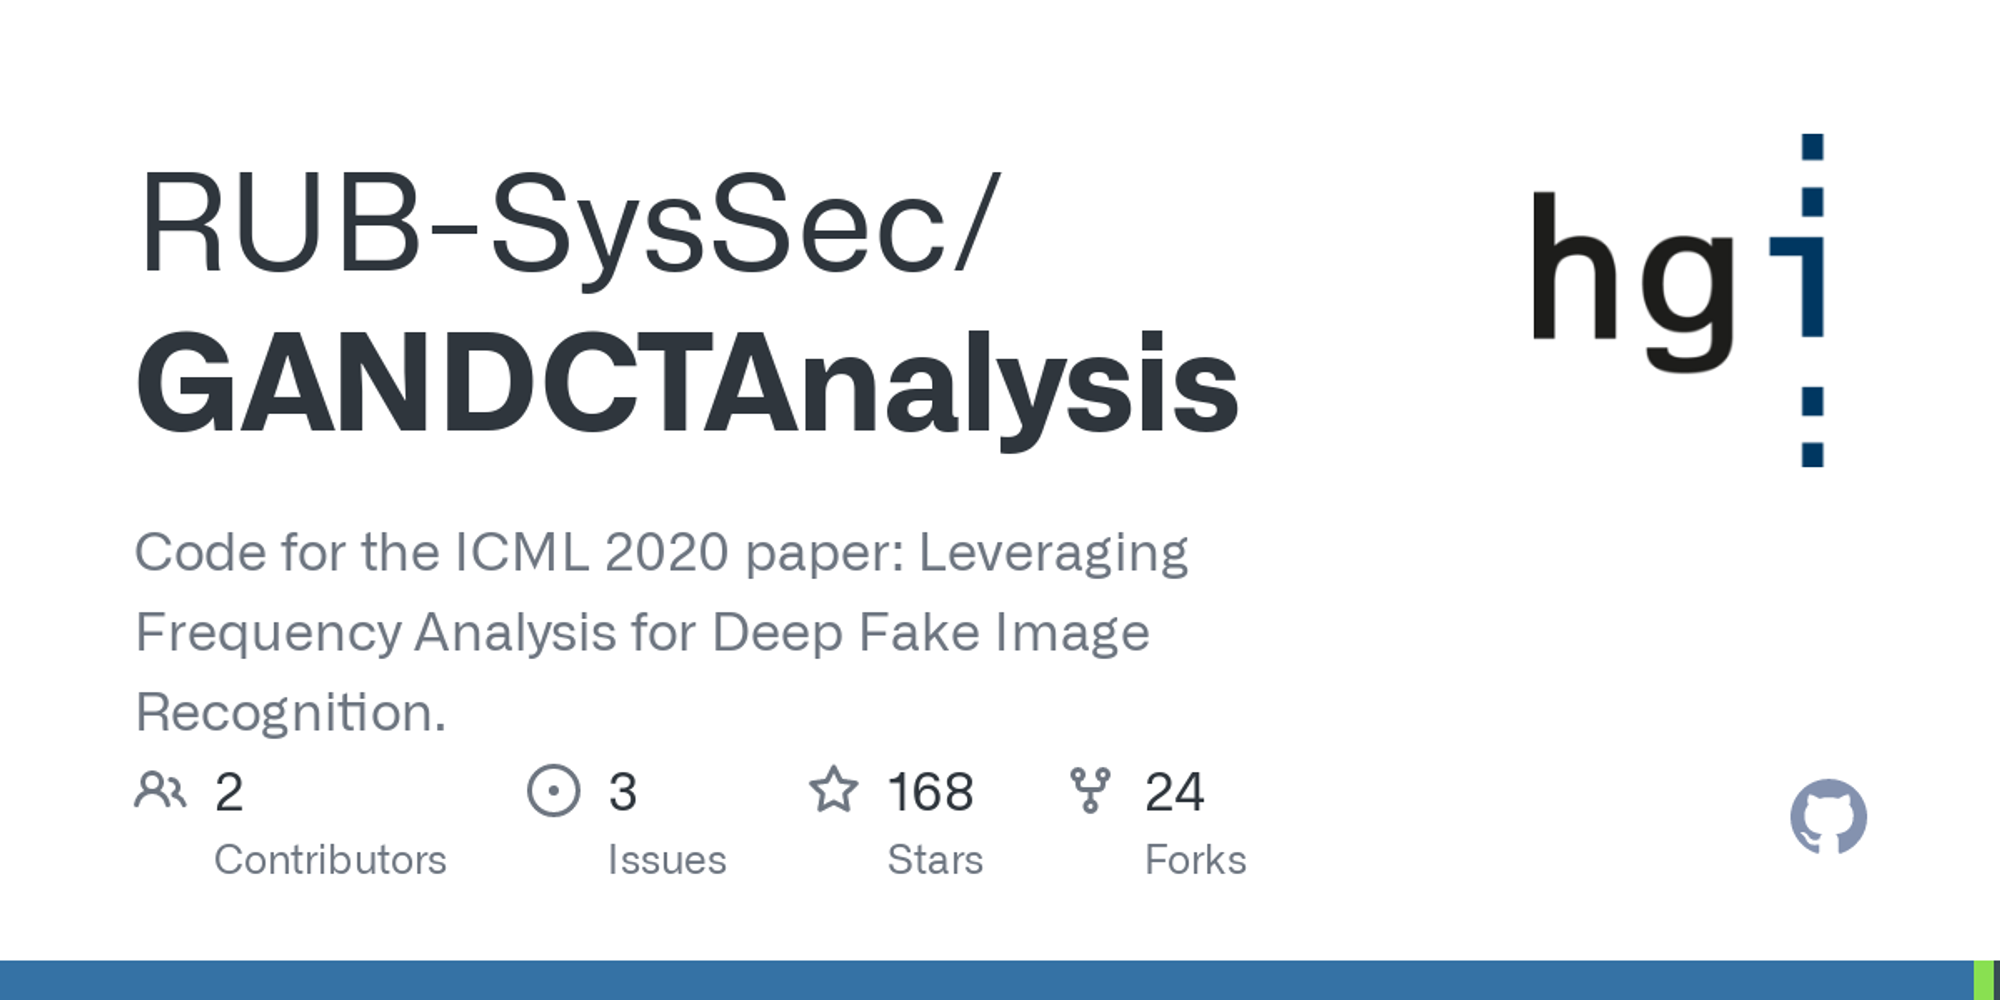 GitHub - RUB-SysSec/GANDCTAnalysis: Code for the ICML 2020 paper: Leveraging Frequency Analysis for Deep Fake Image Recognition.